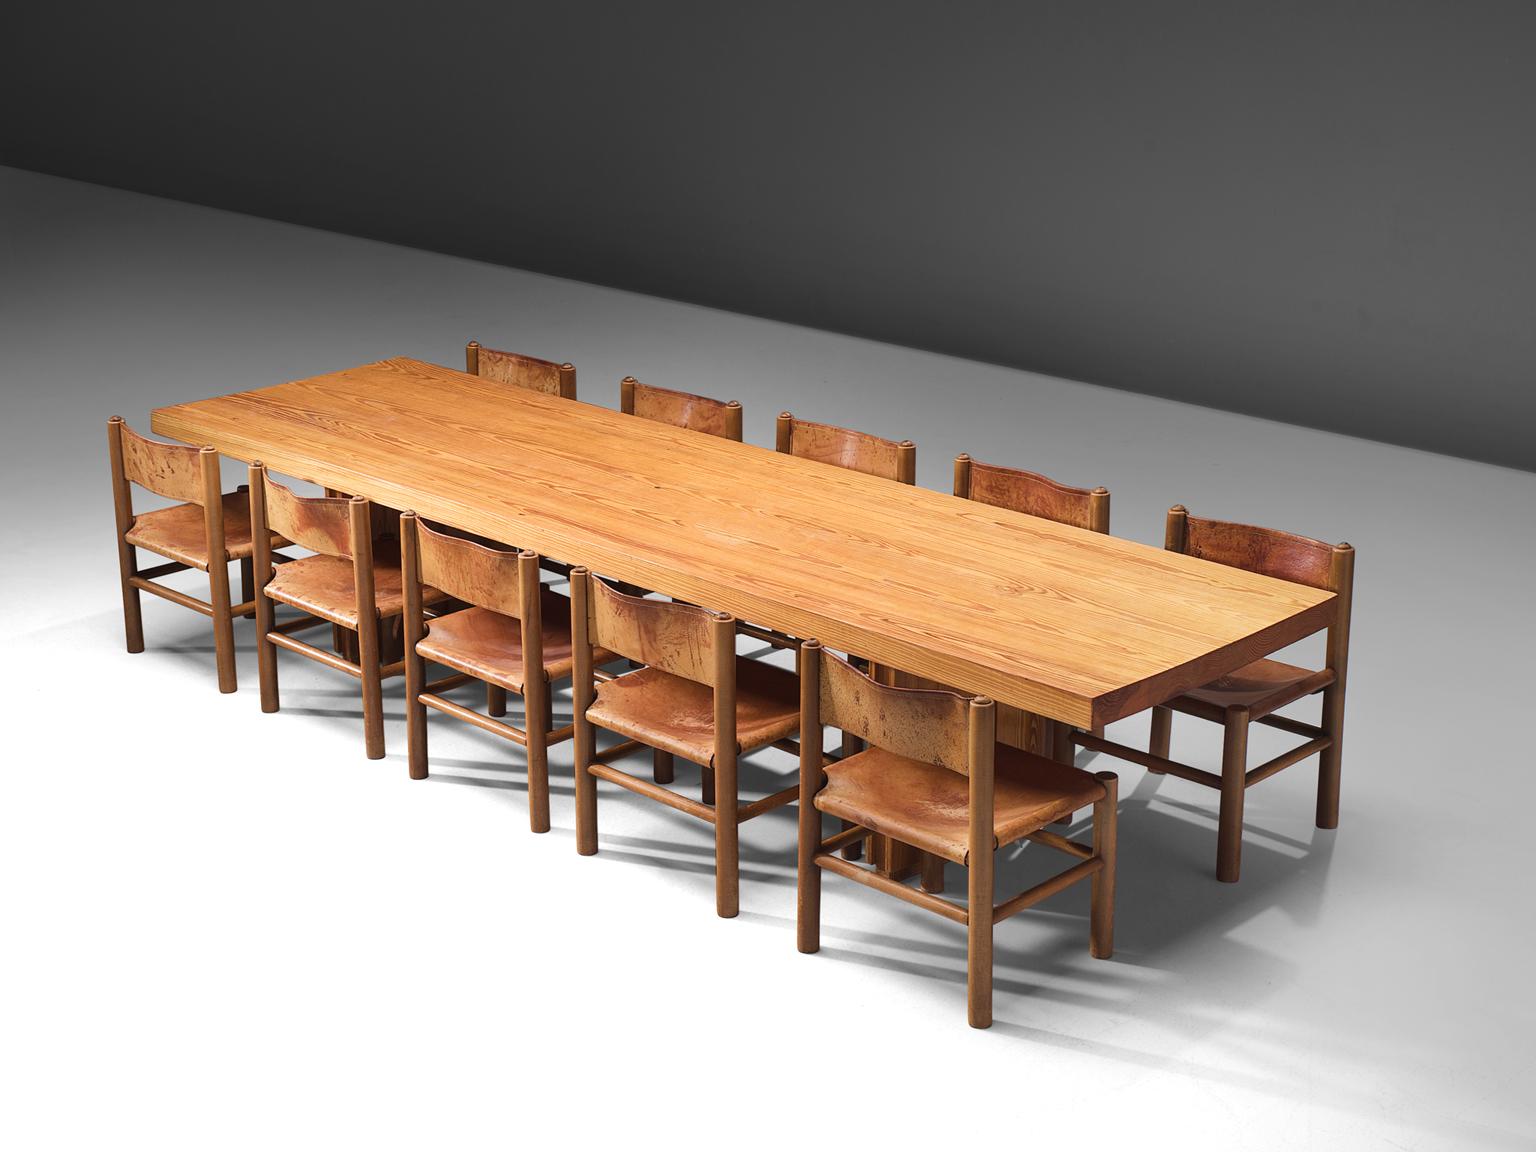 Rafael De La Joya, pine table and cognac leather and pine chairs, Spain, 1960s.

This low, large table is accompanied by eleven chairs which have the same legs, is made in solid pine. The dining table presents the beautiful patterns of the pine